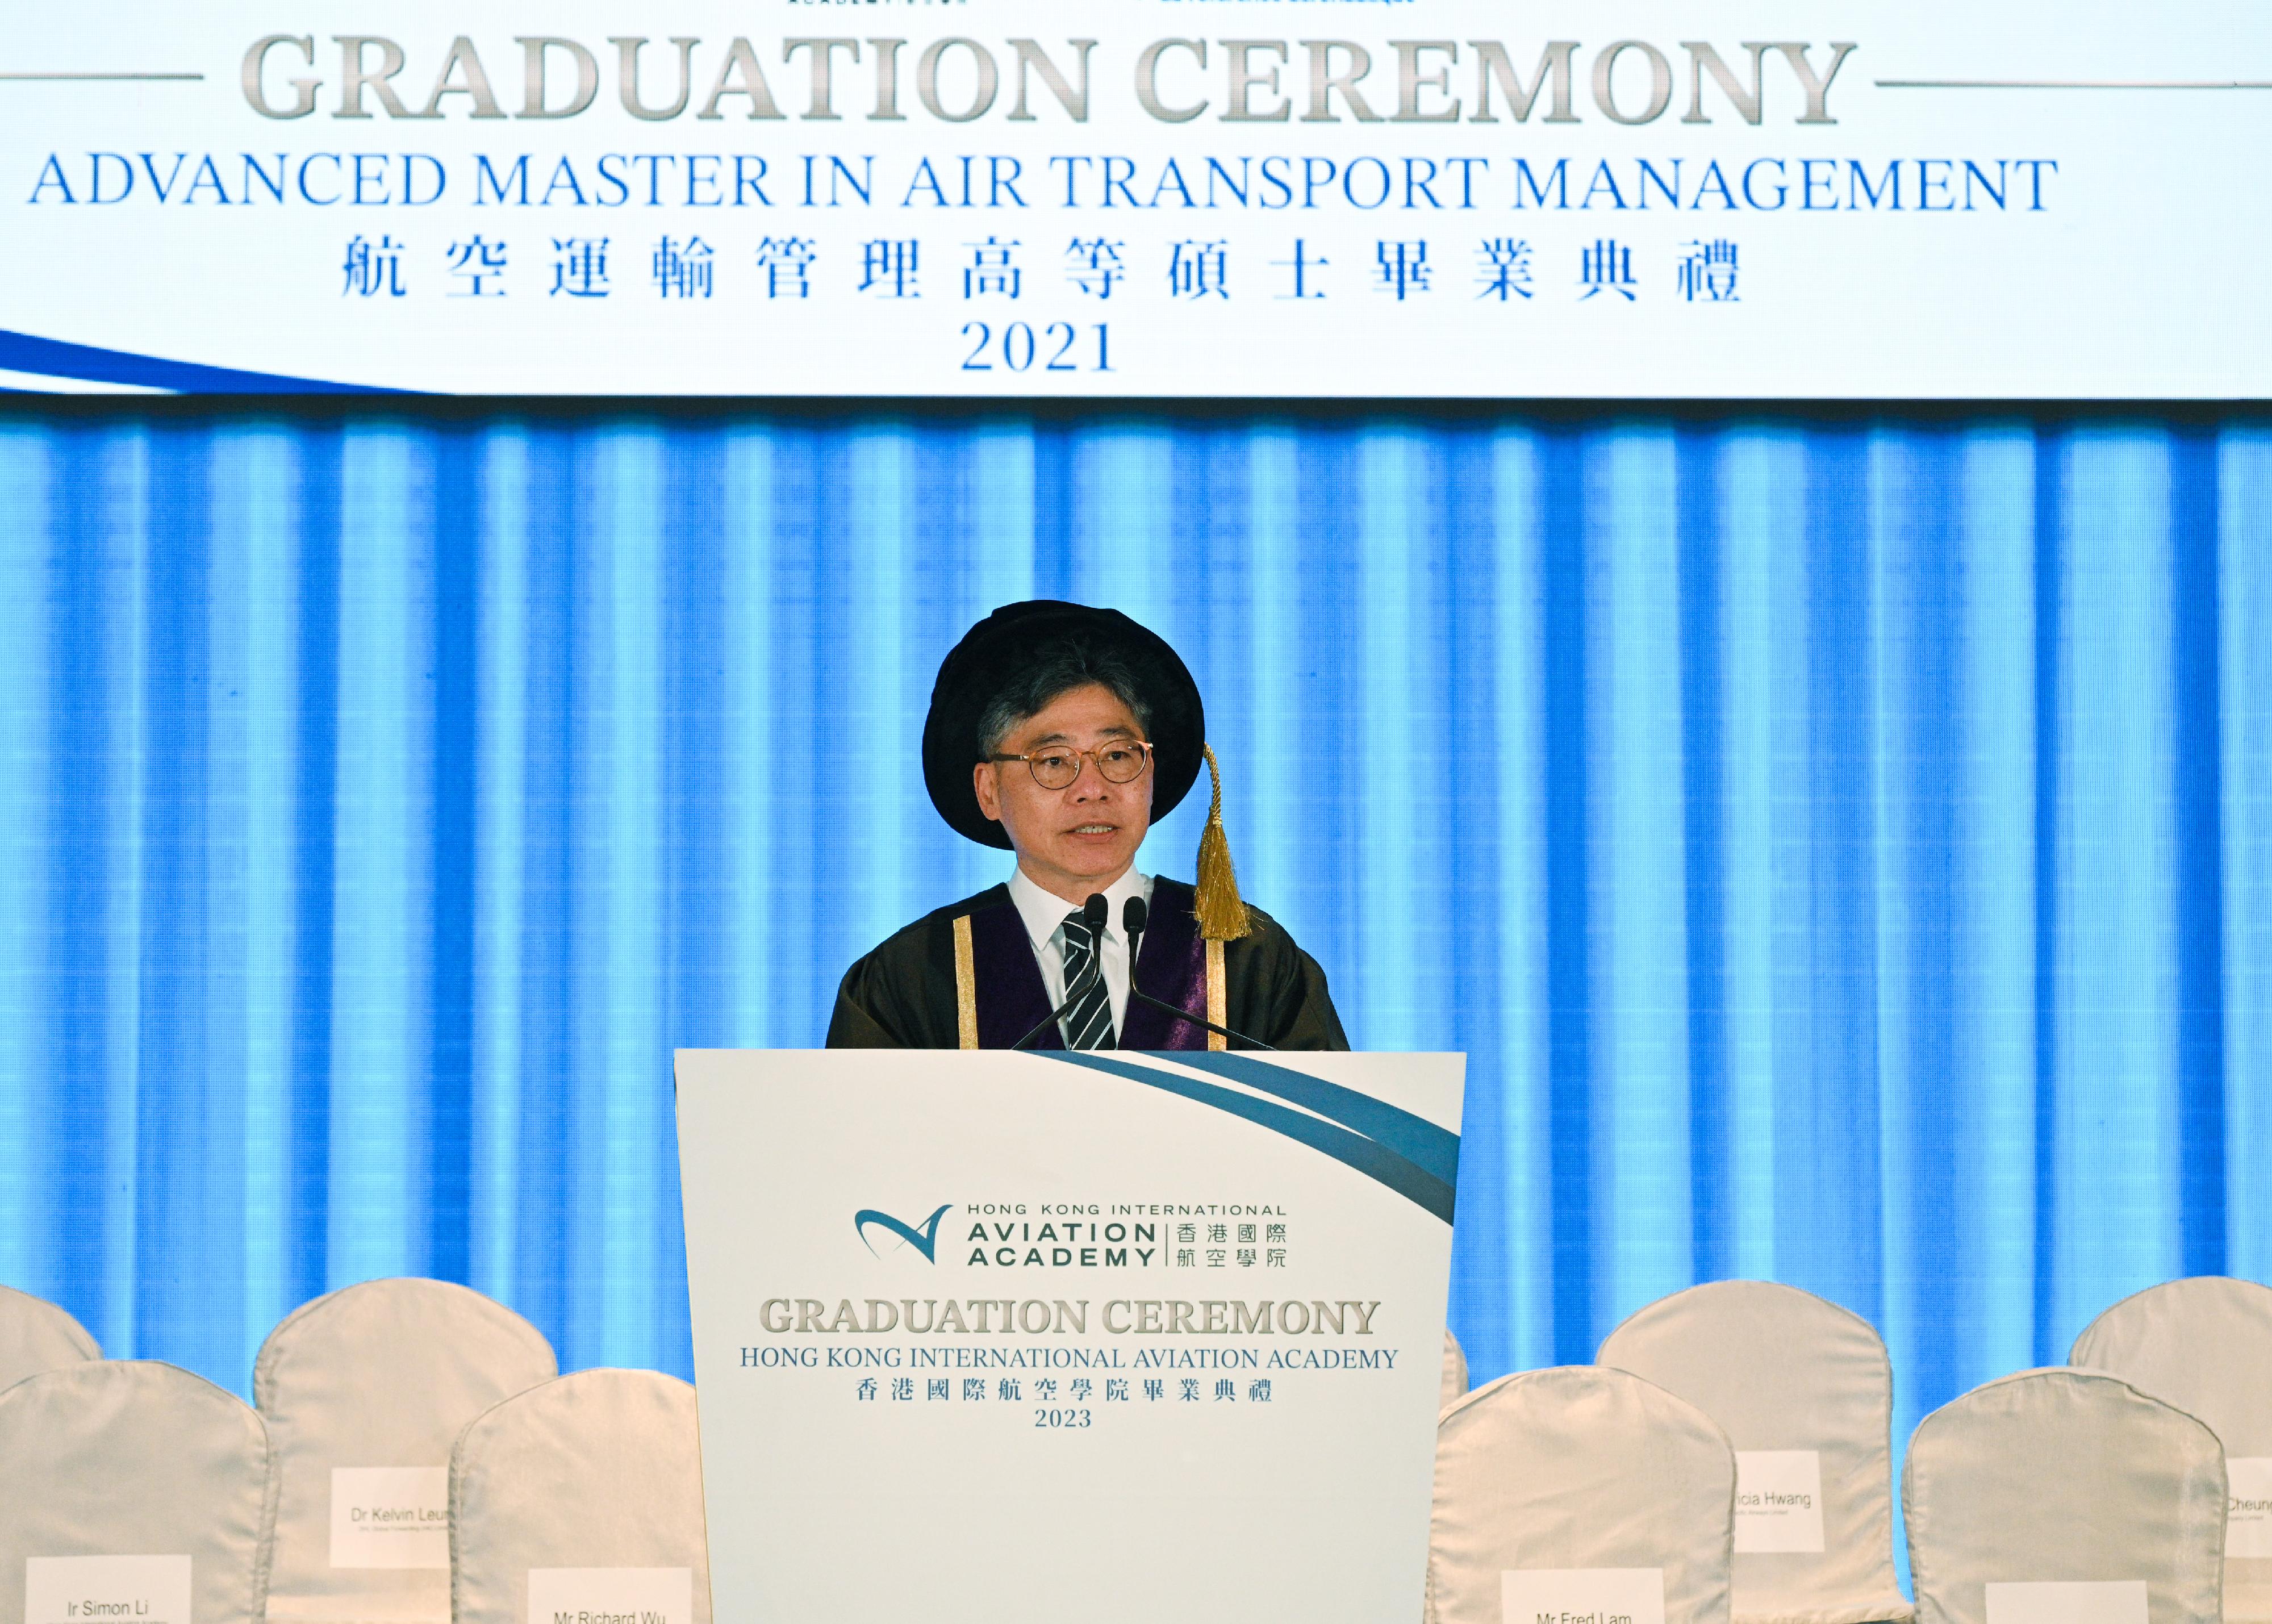 The Secretary for Transport and Logistics, Mr Lam Sai-hung, today (March 10) attended the Hong Kong International Aviation Academy's Graduation Ceremony for the 2021 Cohort of the Advanced Master Programme in Air Transport Management at AsiaWorld-Expo. Photo shows Mr Lam delivering opening remarks.